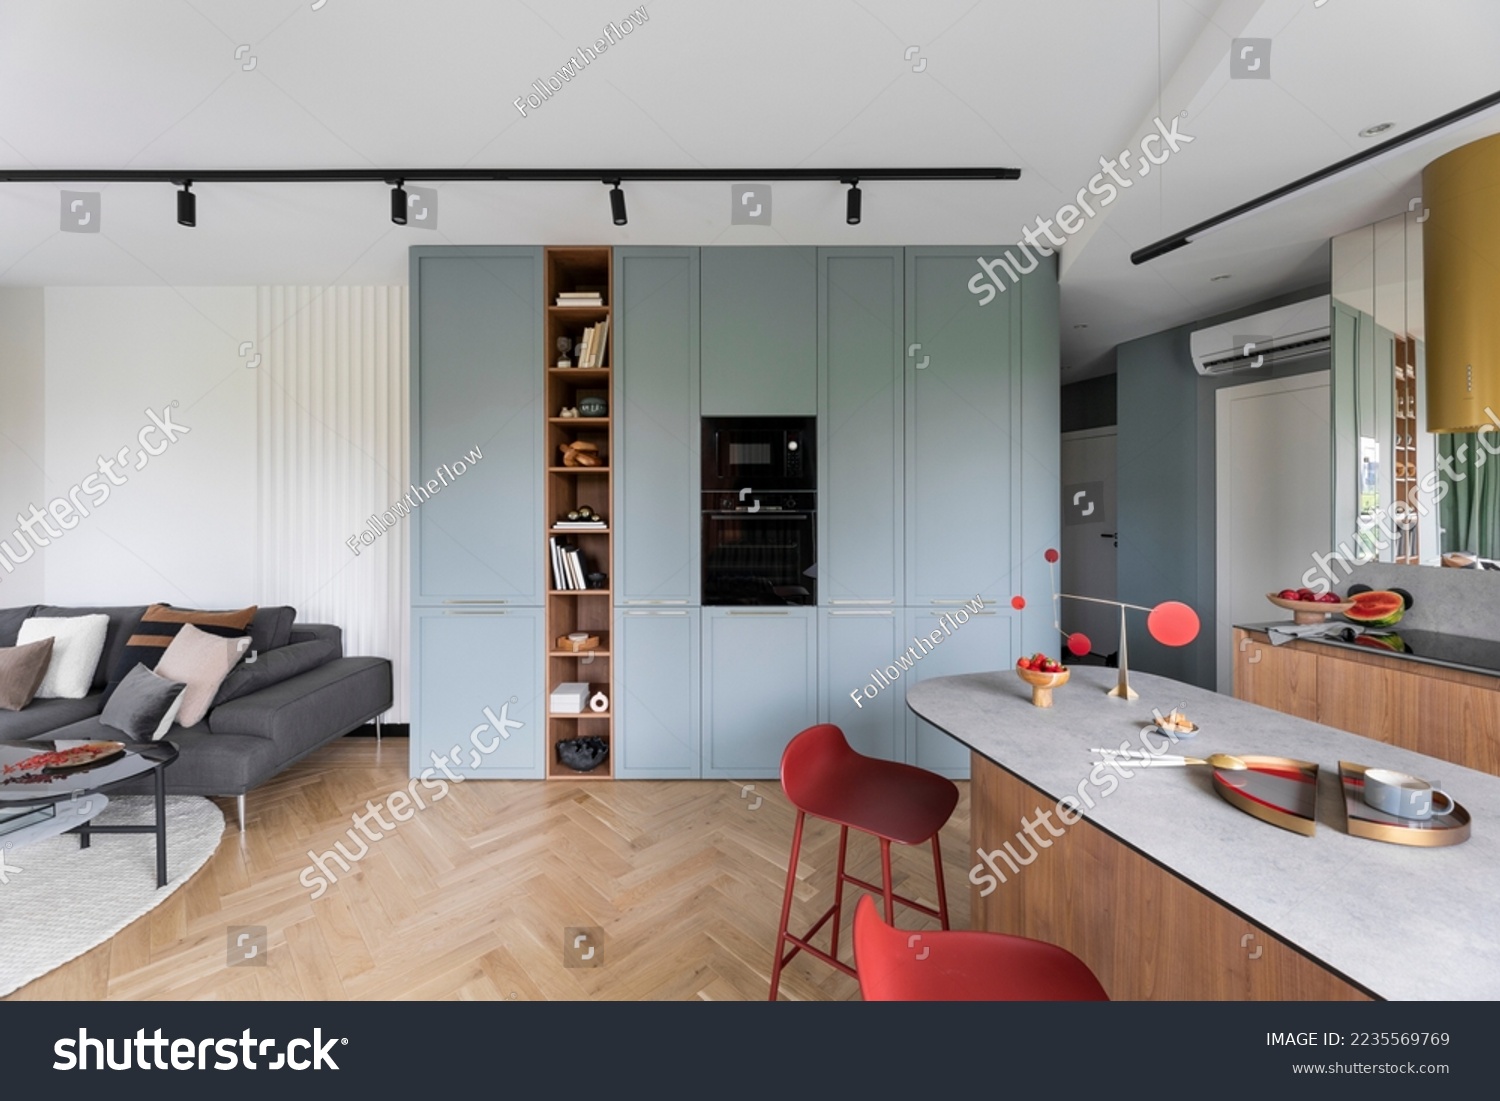 Interior design of colorful open space with built-in oven, bookcase, modern red hockers, wooden kitchen island, gray sofa, pillows, panels floor and personal accessories. Home decor. Template. #2235569769